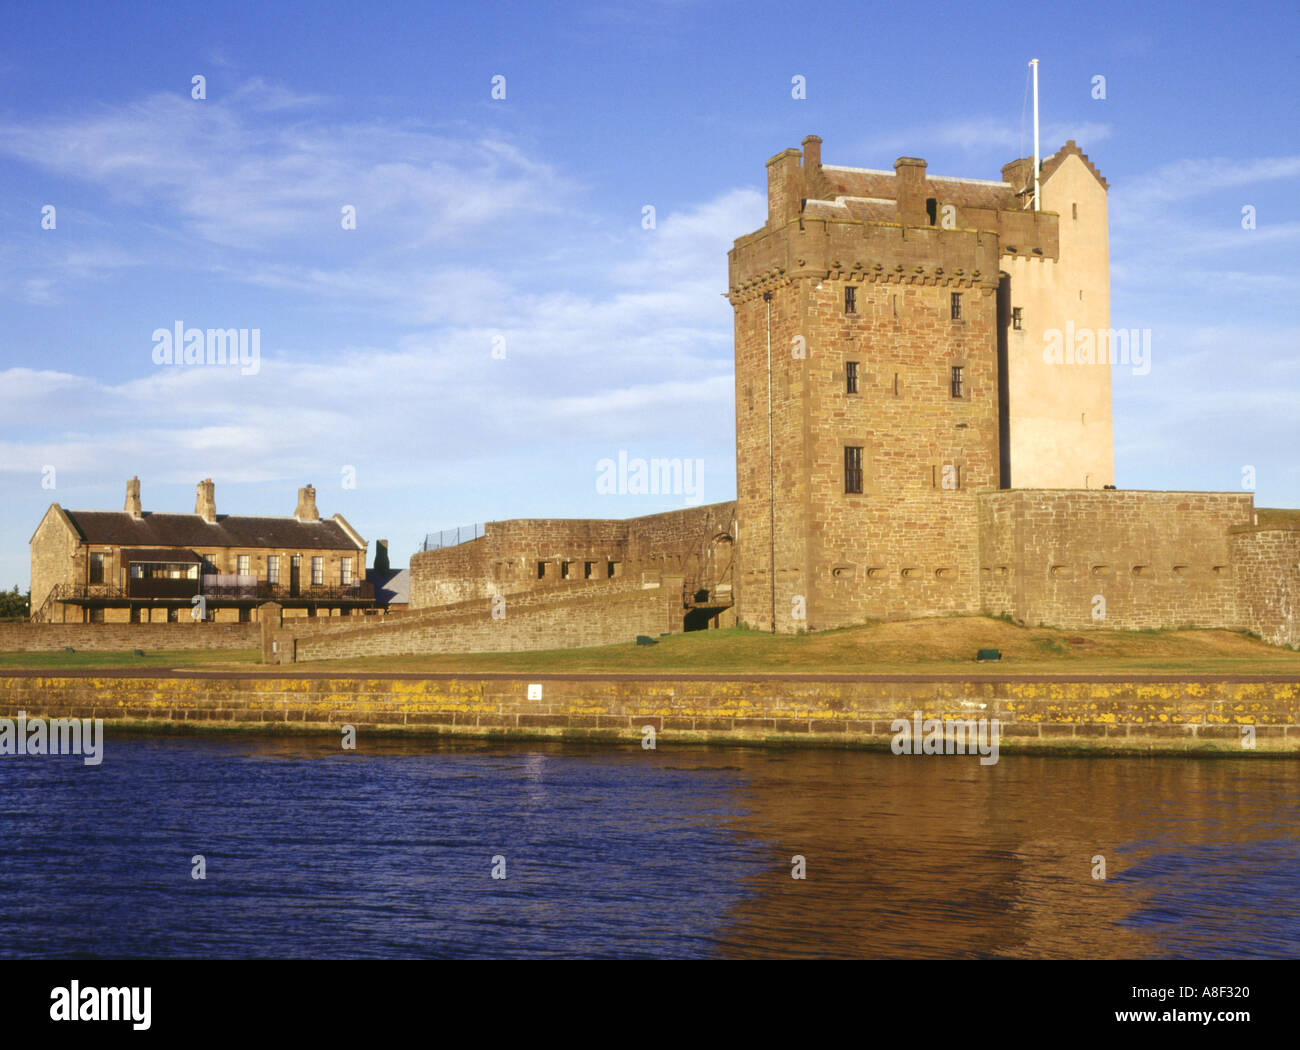 dh Broughty Ferry castle BROUGHTY FERRY ANGUS Castle barracks harbour Whaling museum battery scotland dundee Stock Photo